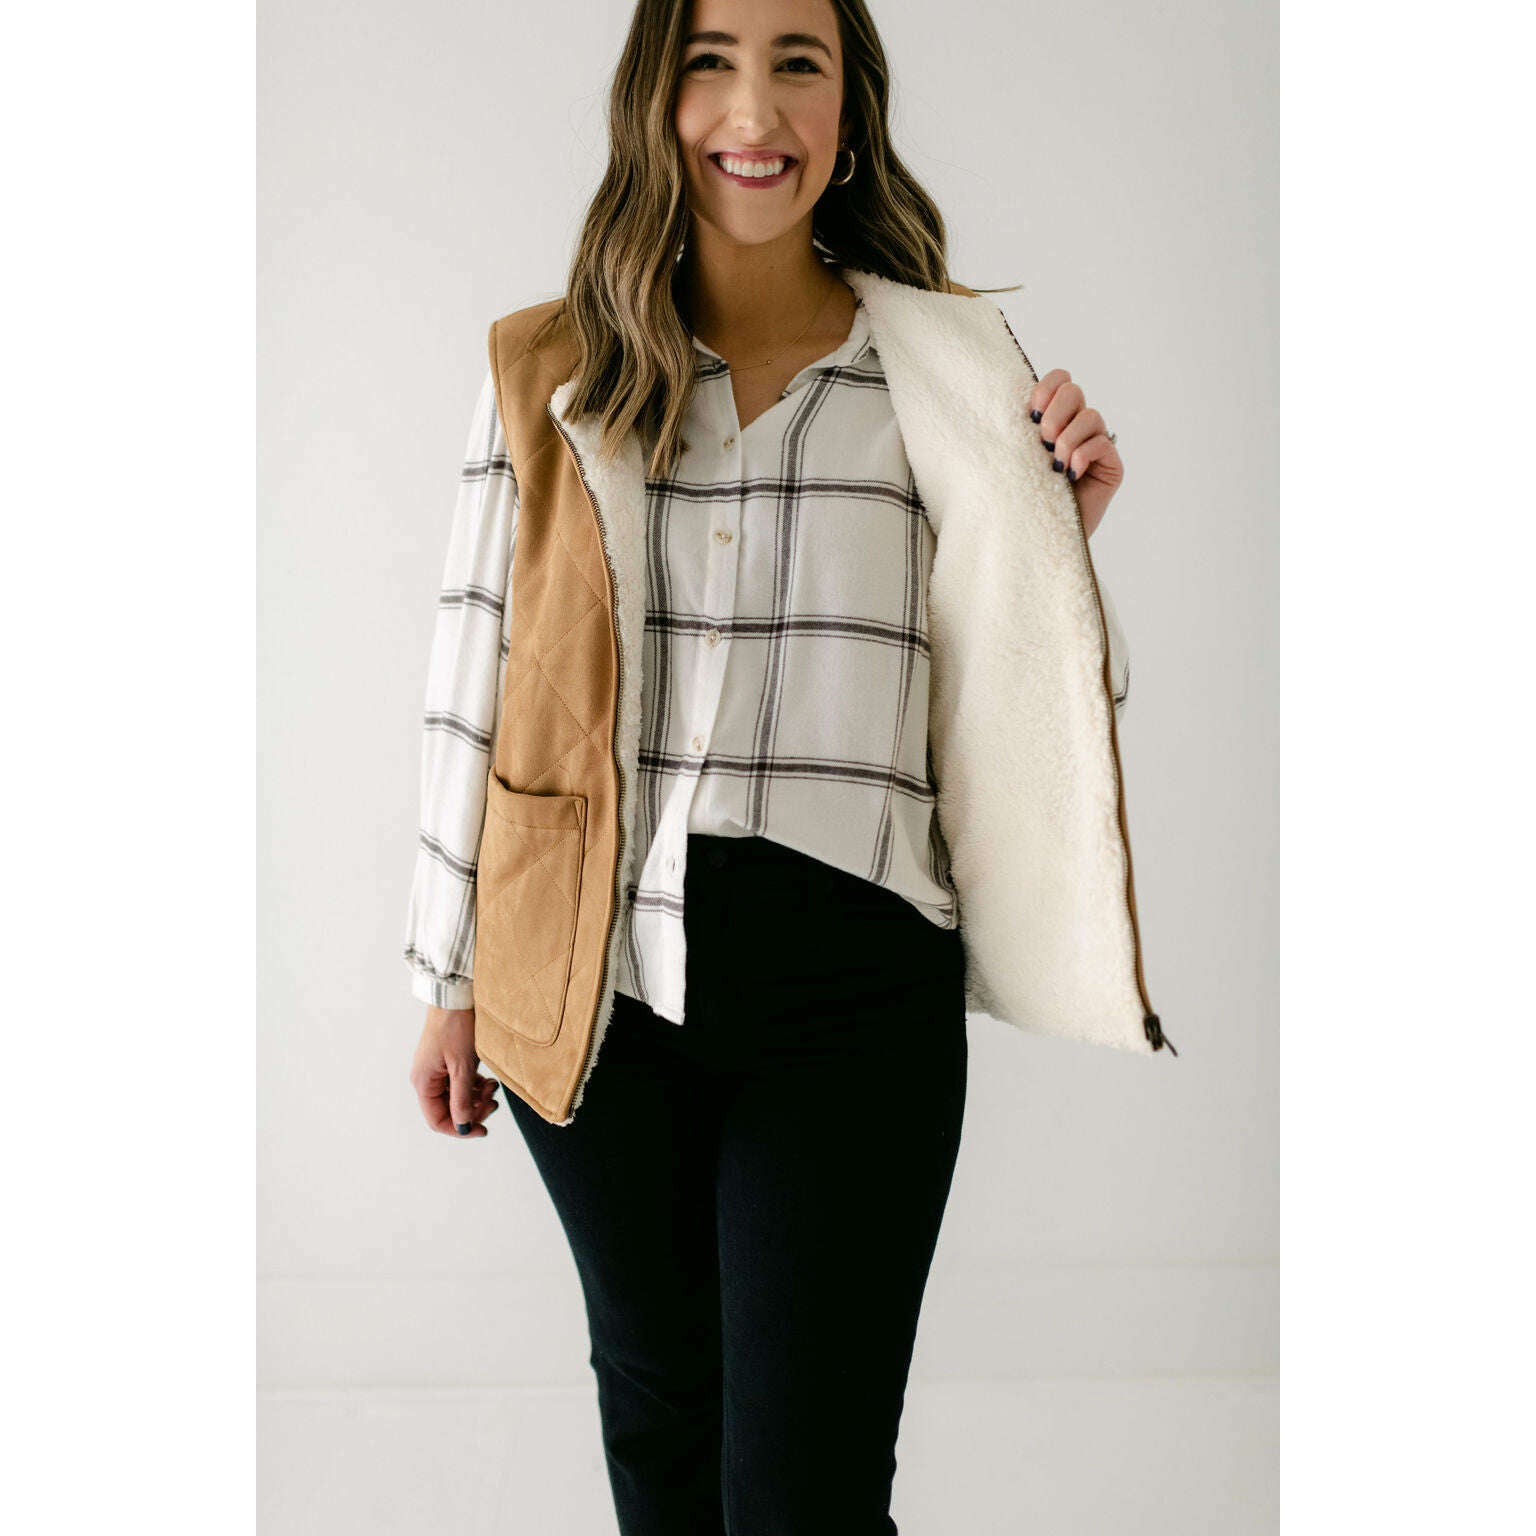 8.28 Boutique:Z Supply,Z Supply Cosmos Reversible Quilted Sherpa Vest,Vest